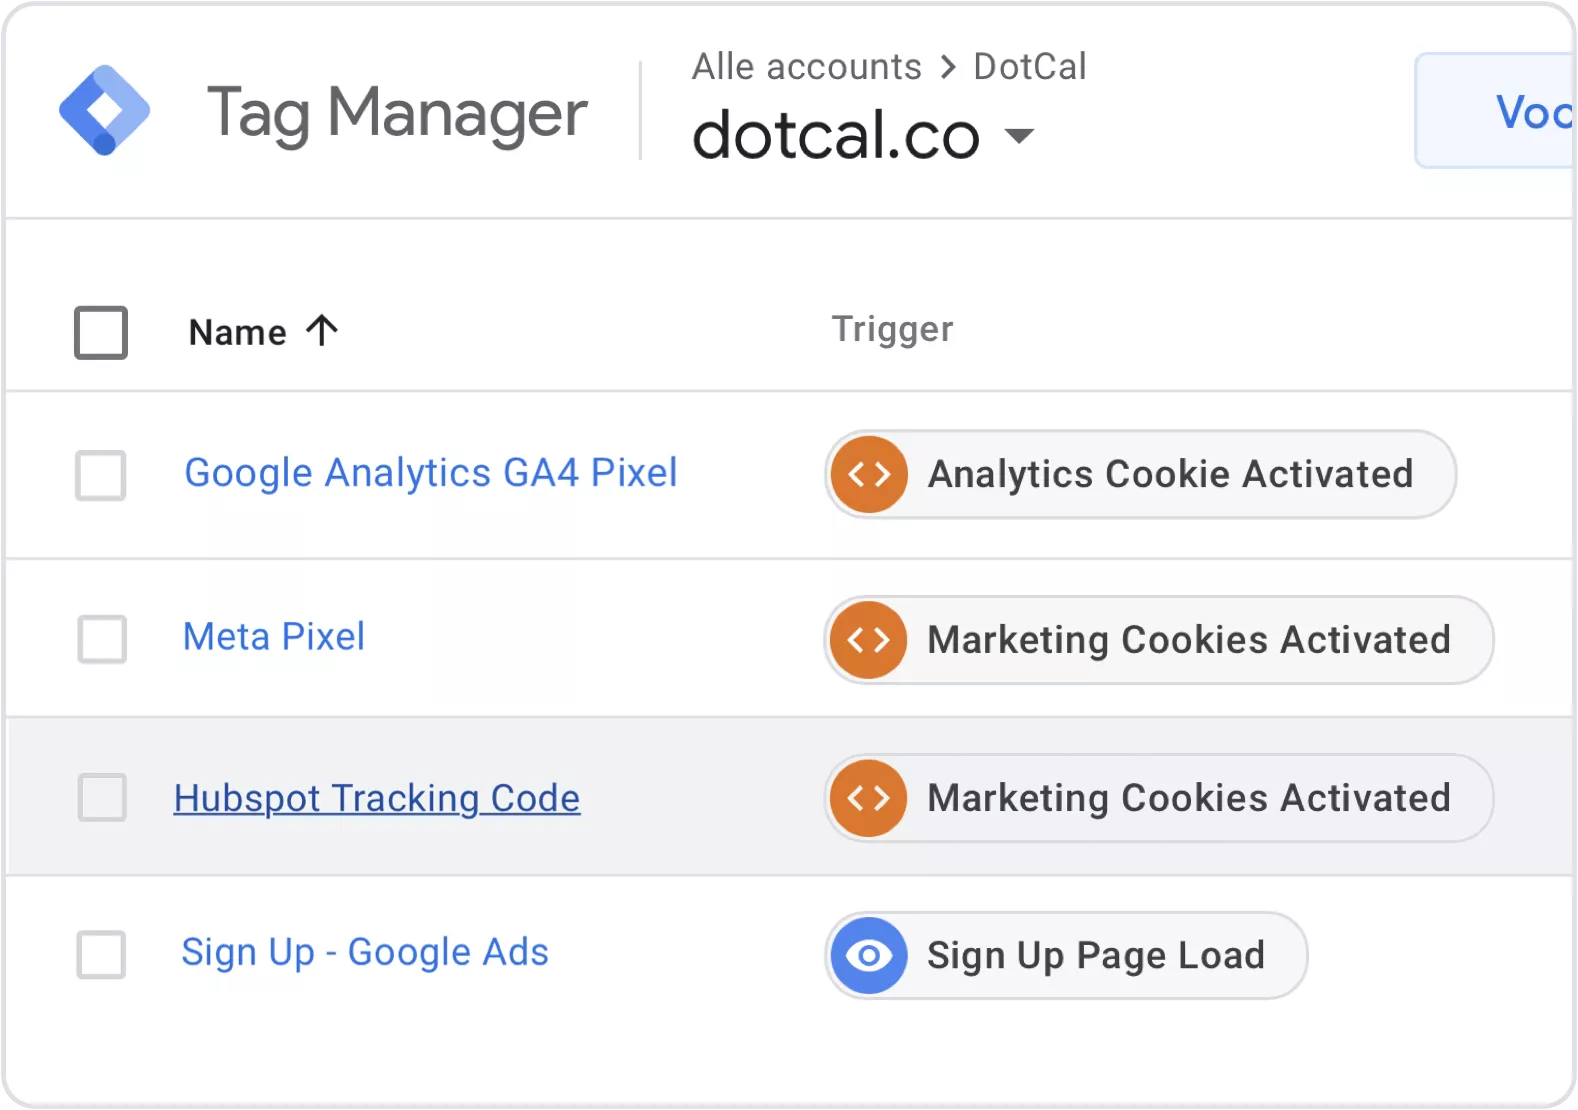 Google Tag Manager Dashboard